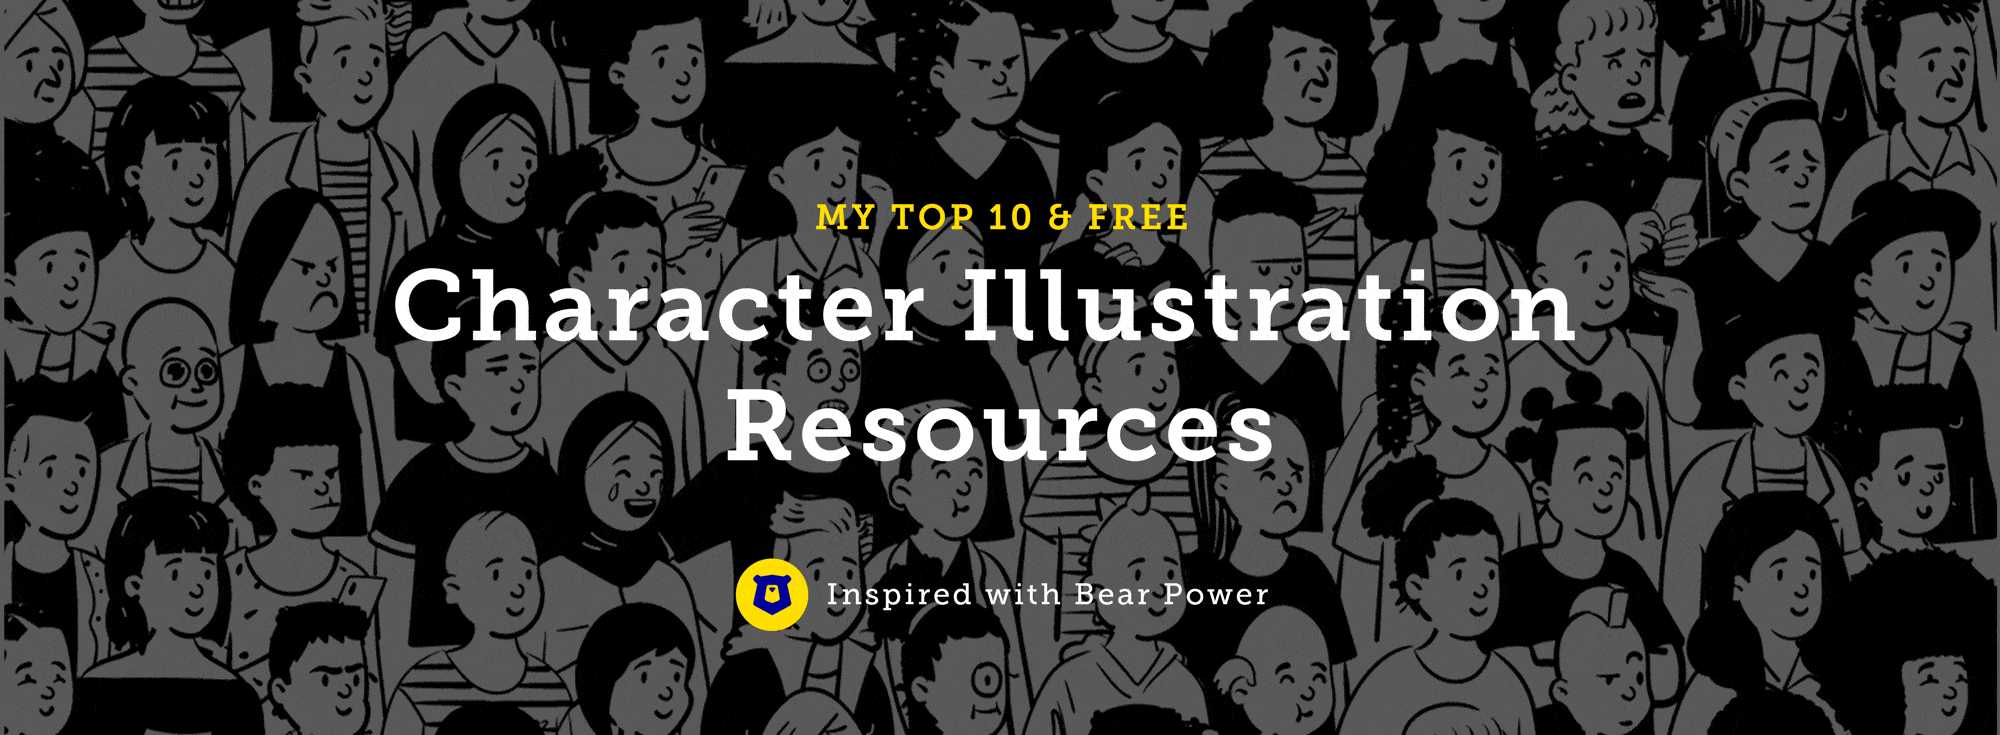 My Top 10 & Free 🤯 Character Illustration Resources 🏆 ✍️ 💪